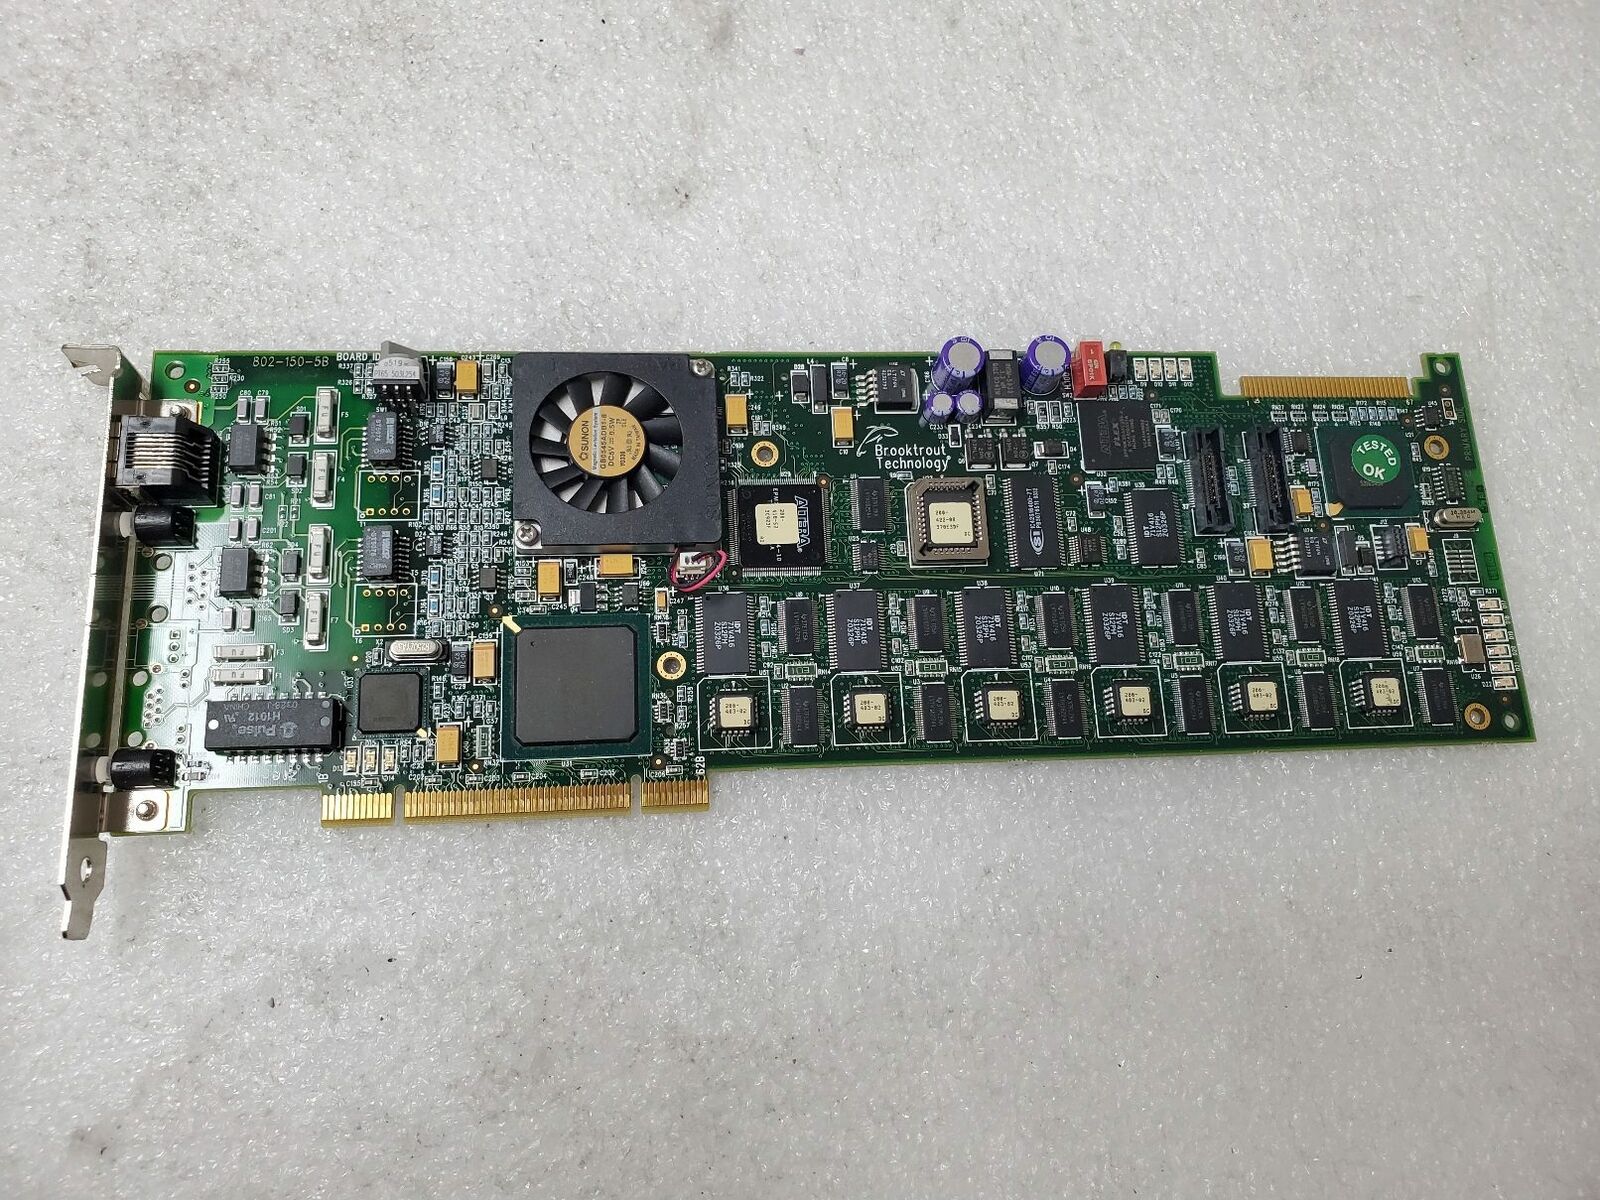 Brooktrout Technology PCI Voice/Fax Board 802-150-5B